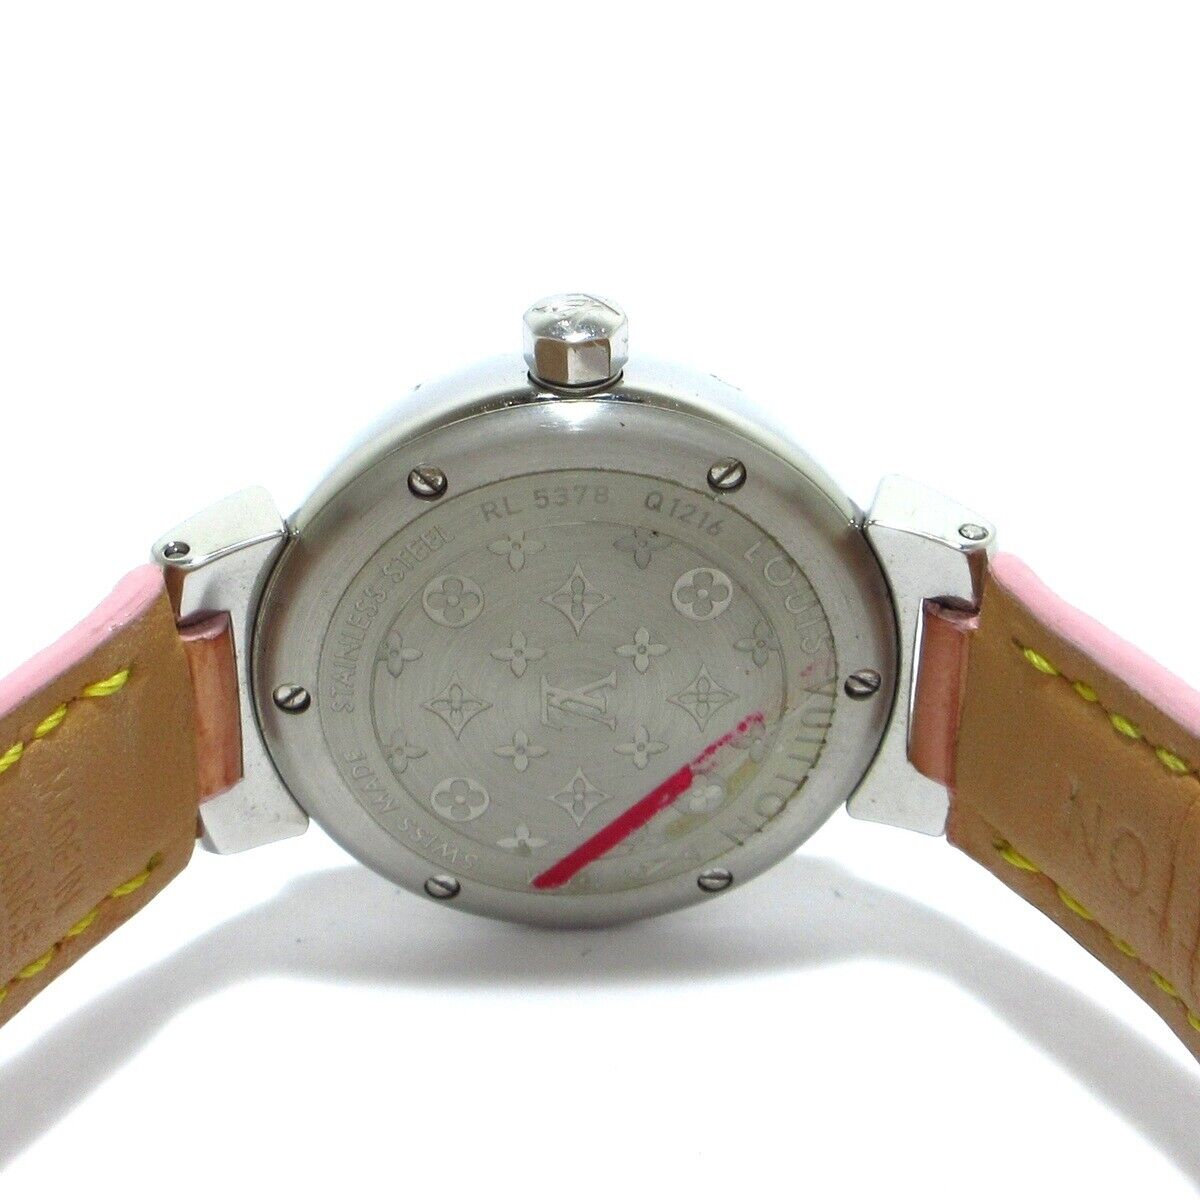 Auth LOUIS VUITTON Tambour Date Q1216 Pink Shell RL5378 Silver